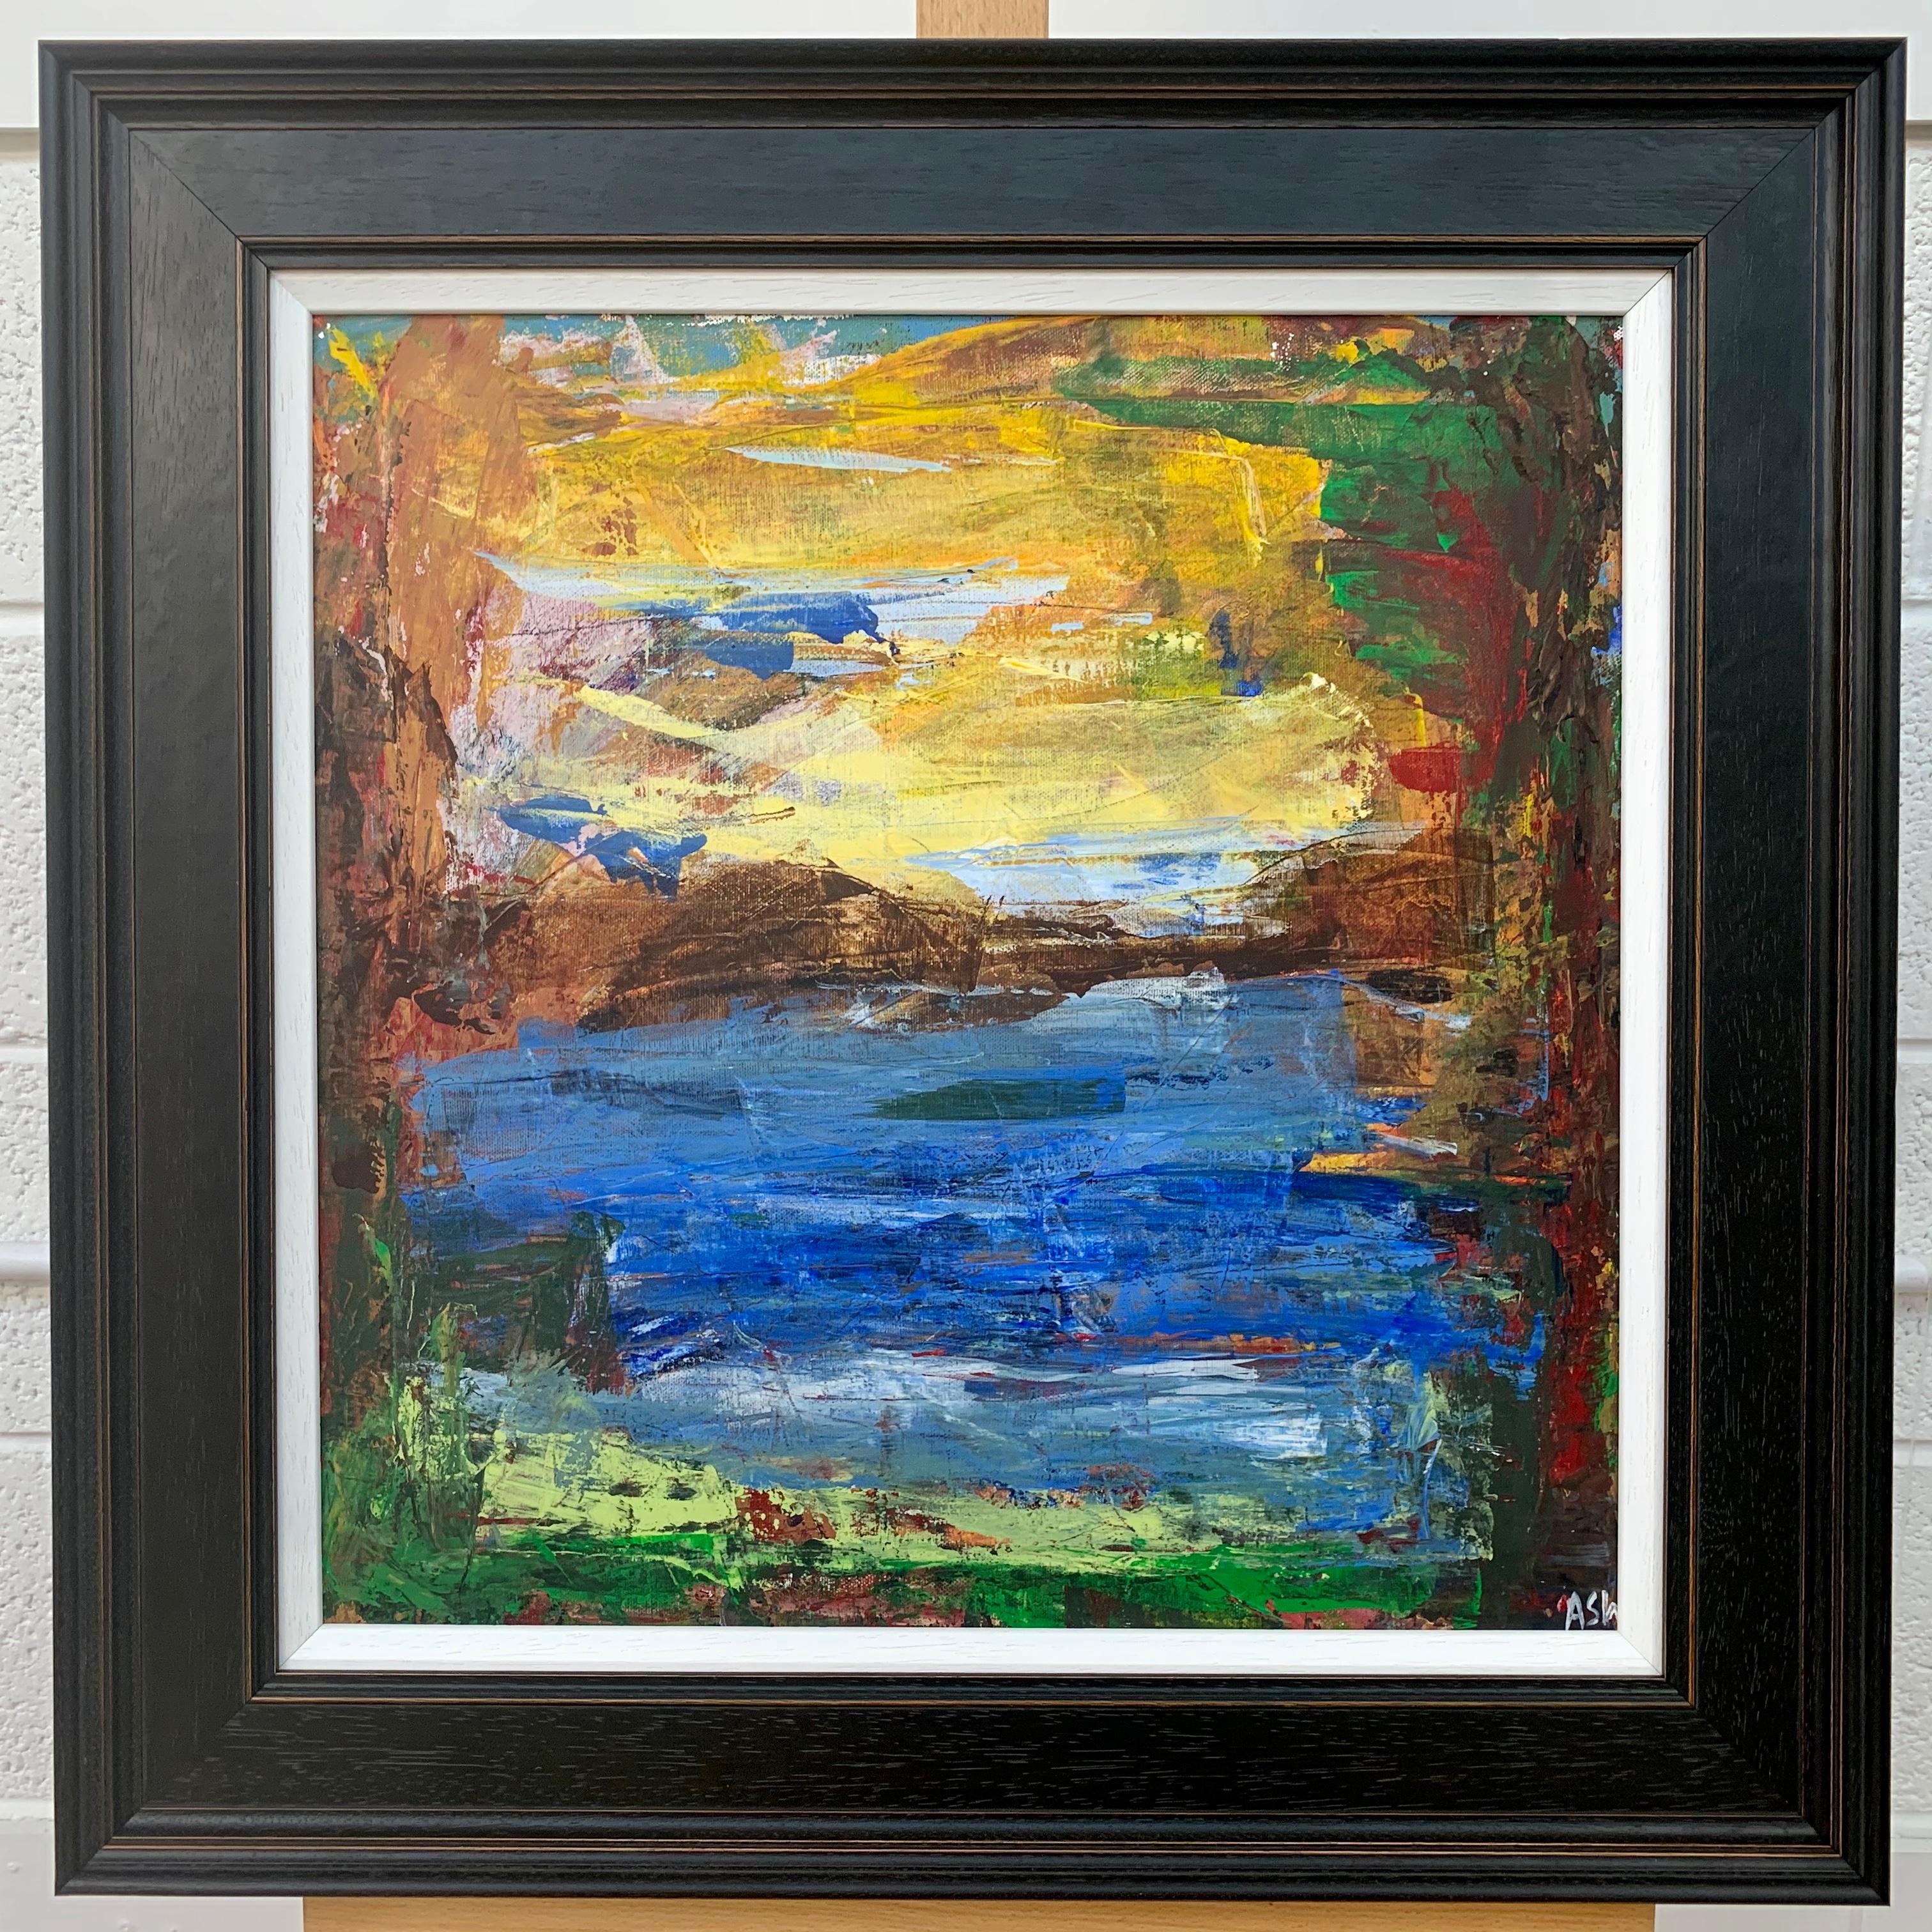 Abstract Expressionist Lake Landscape Painting by Leading British Urban Artist Angela Wakefield. This artwork is from an intense body of abstract work that formed the very foundations of her output as a professional artist. Art critics regard these